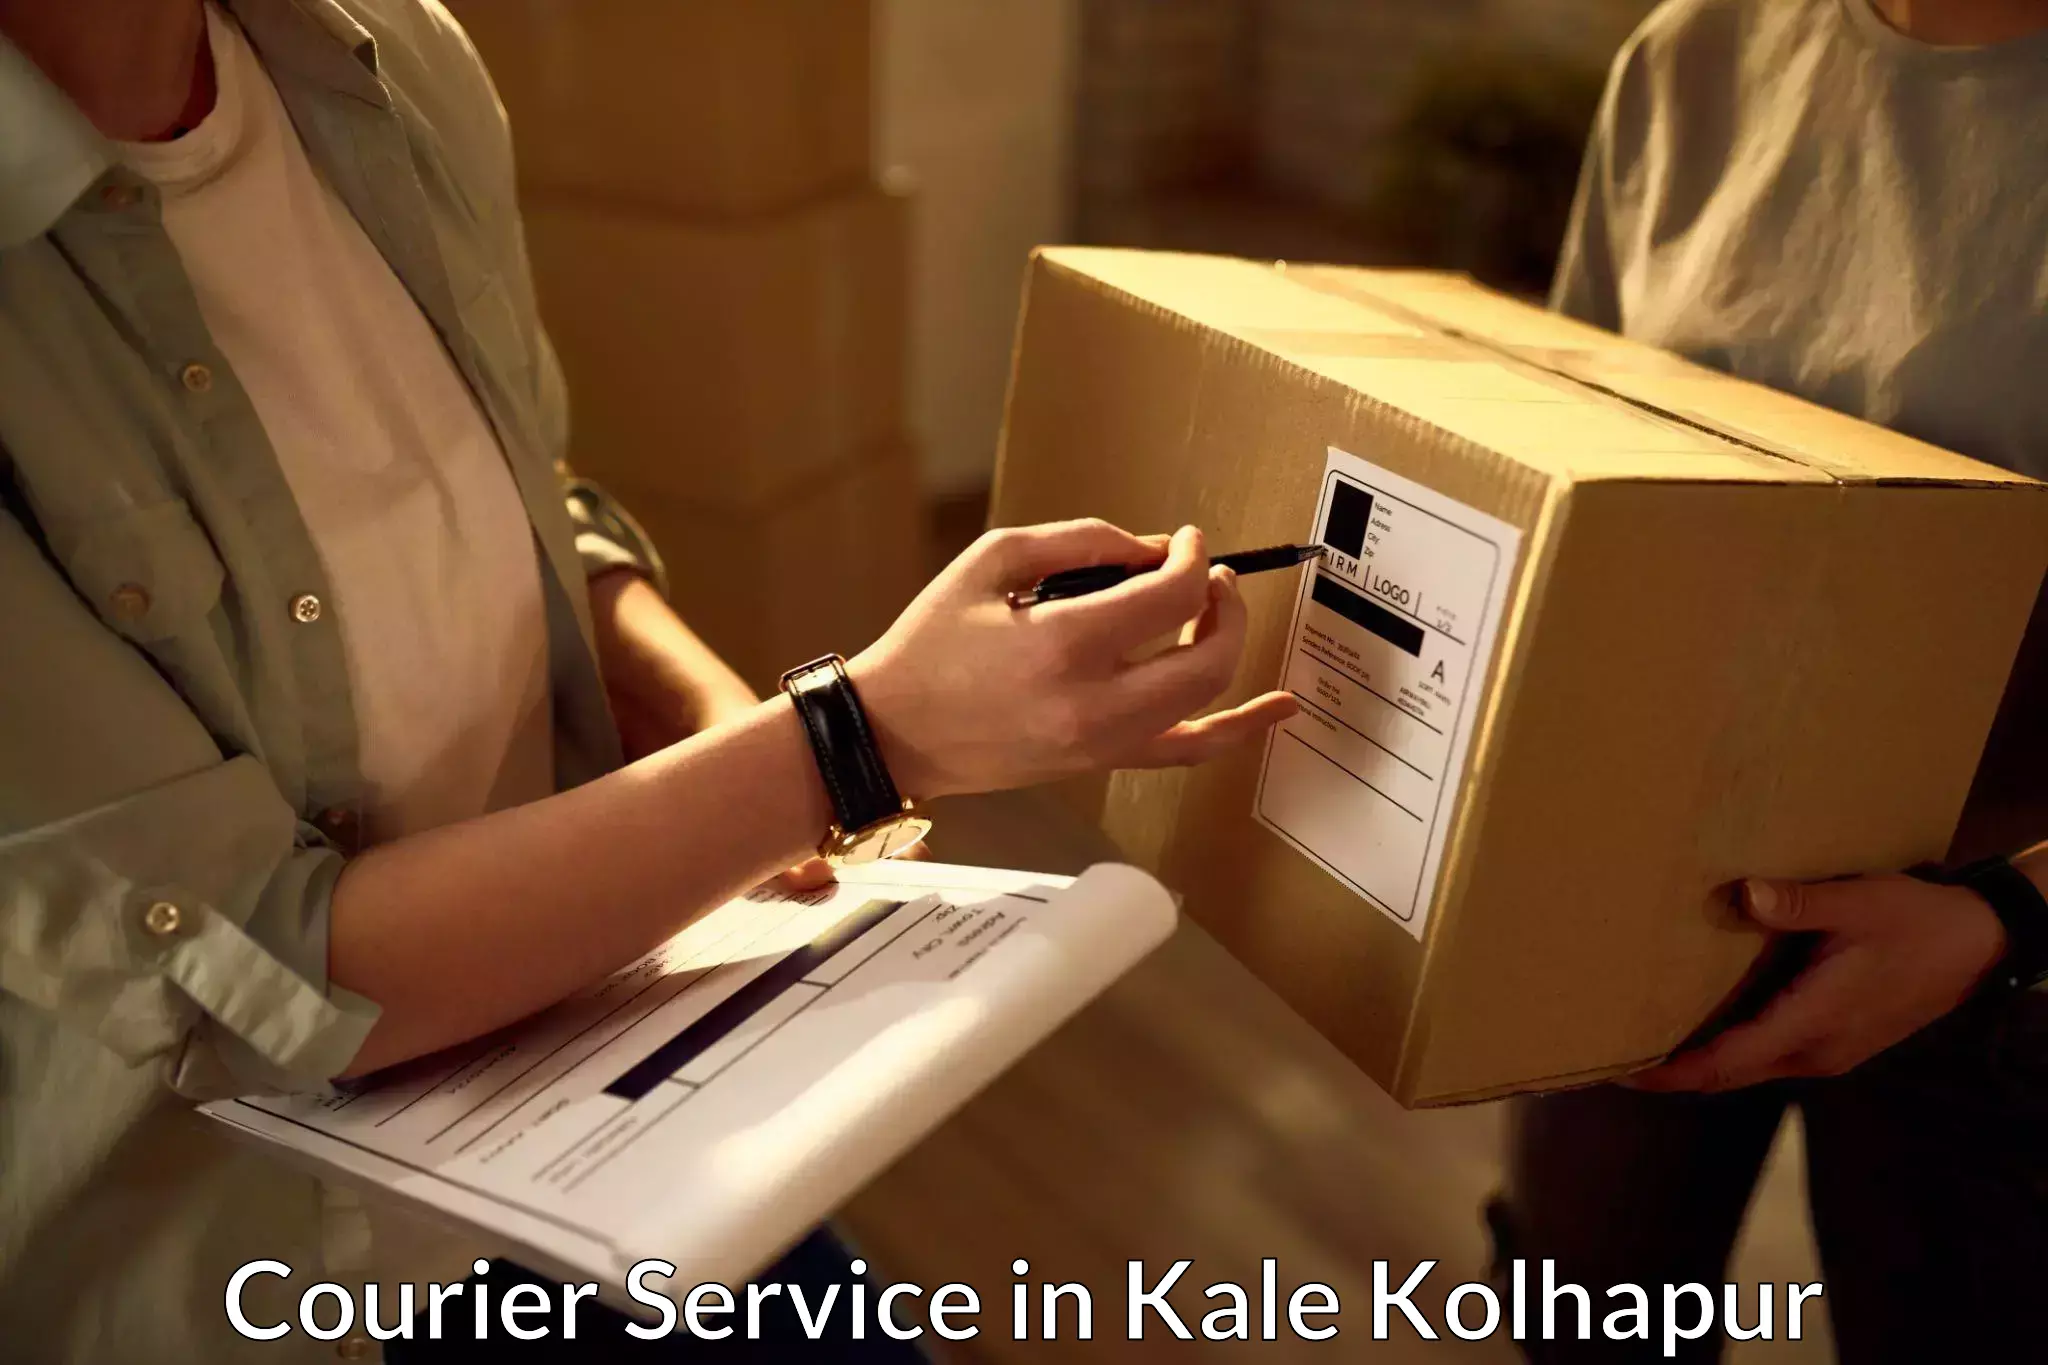 On-demand shipping options in Kale Kolhapur